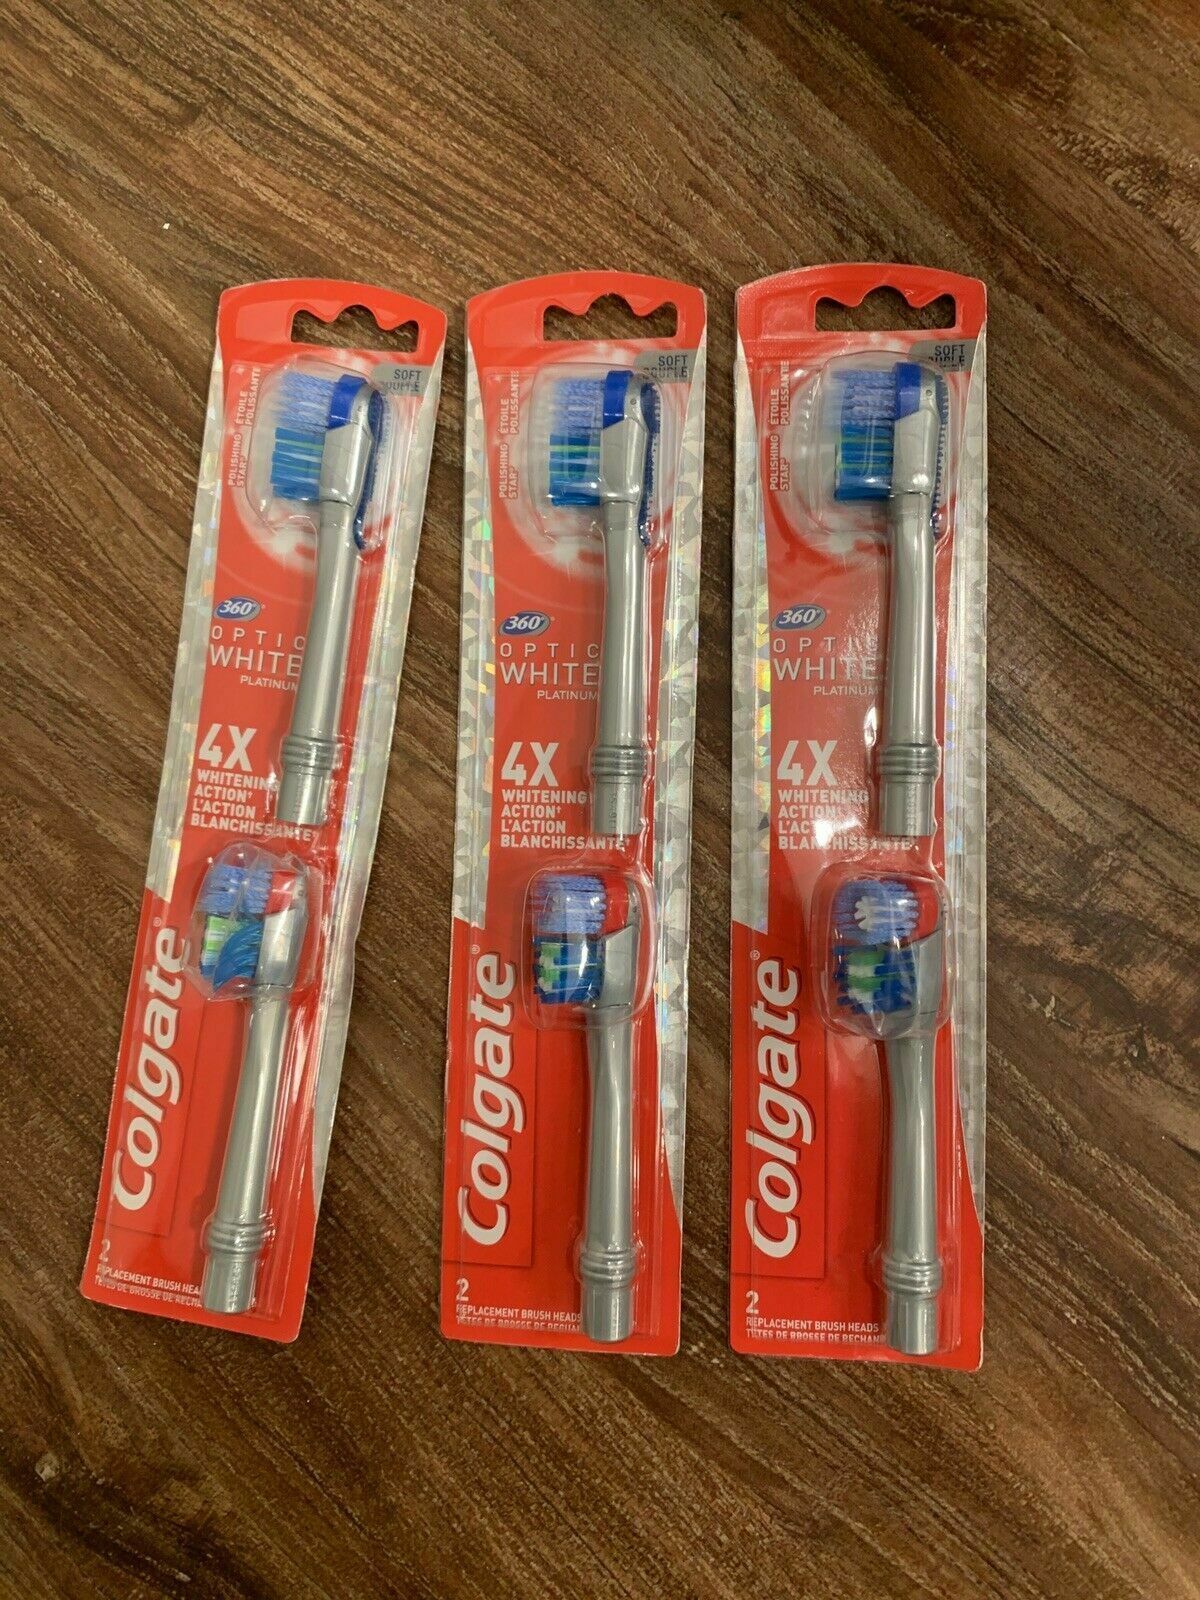 Lot of 6 New Soft Colgate 360 Optic White Platinum Replacement Brush Heads Seald